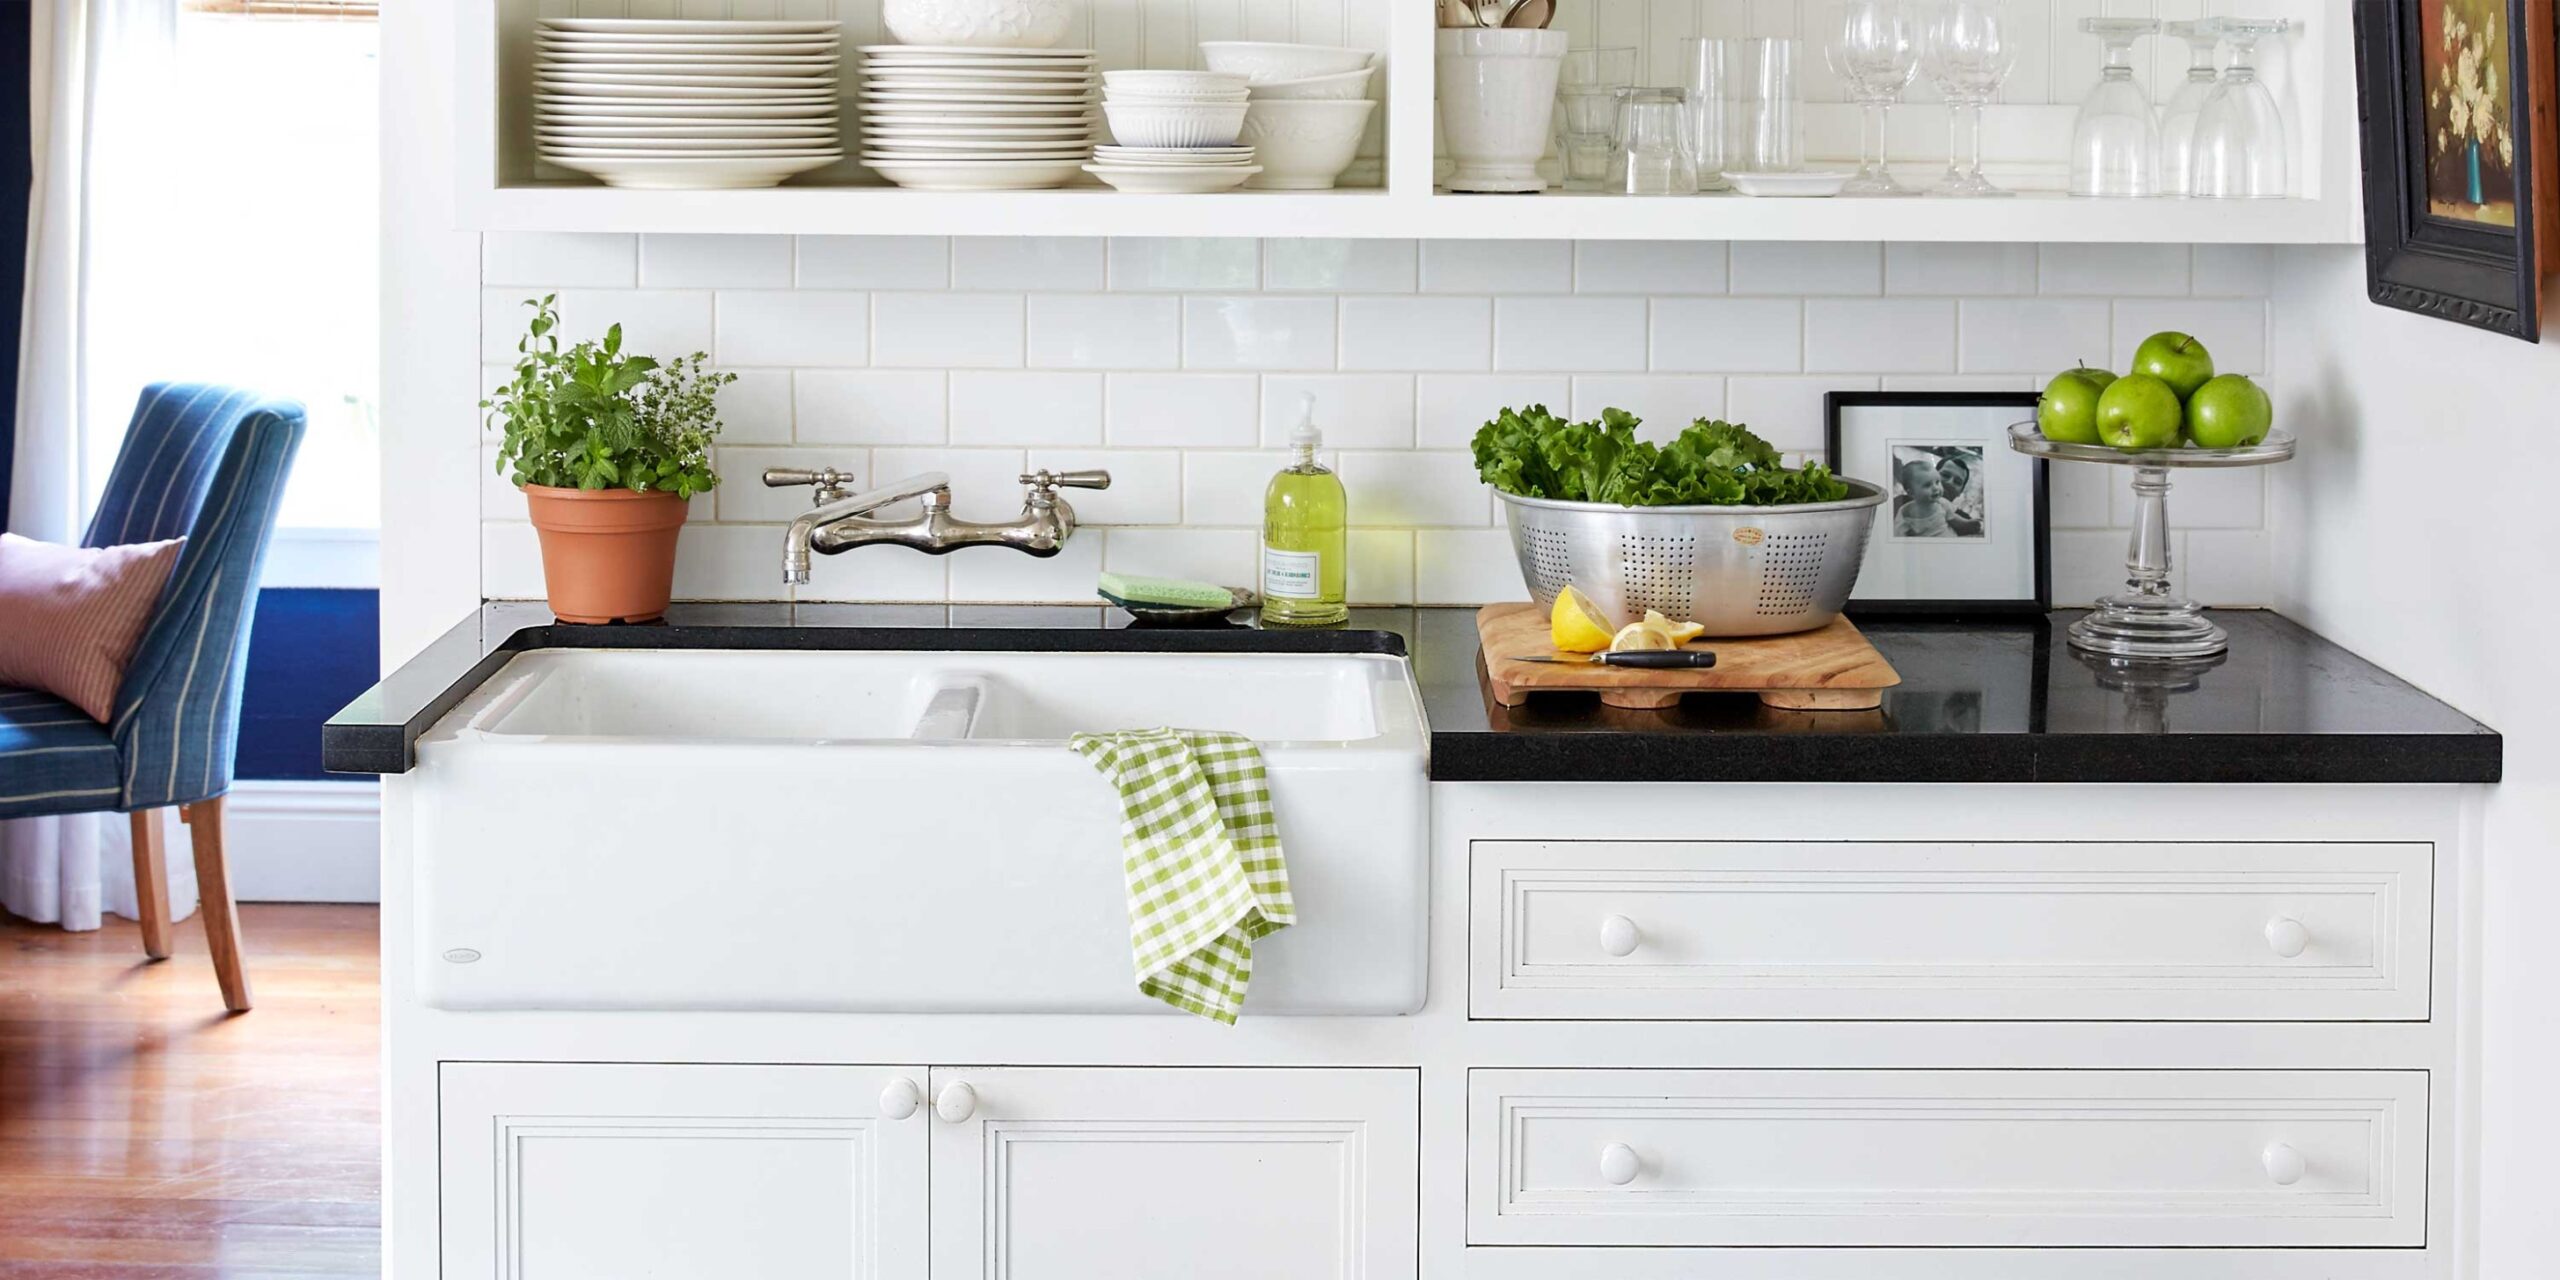 Homes with Subway Tiles, Barn Doors and Farmhouse Sinks Sell  - kitchen features that sell